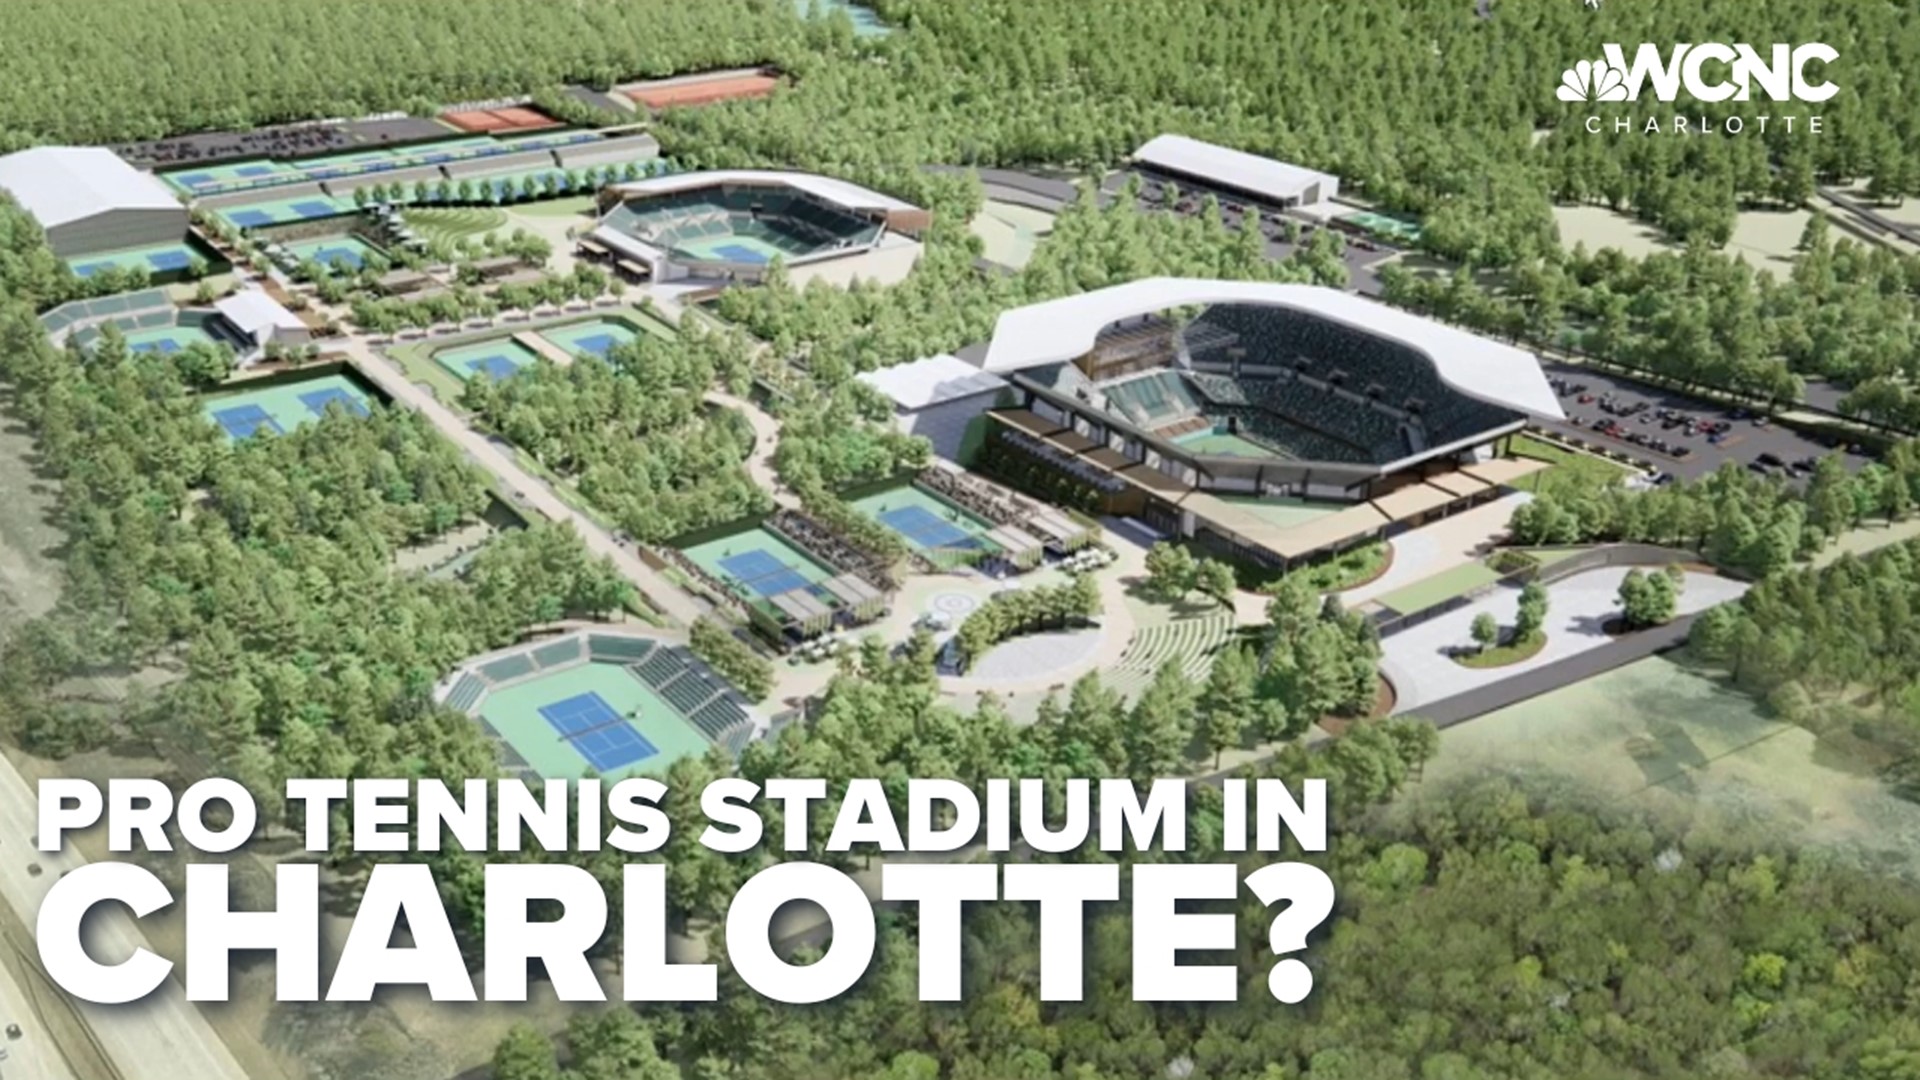 400M facility would bring major tennis event to Charlotte